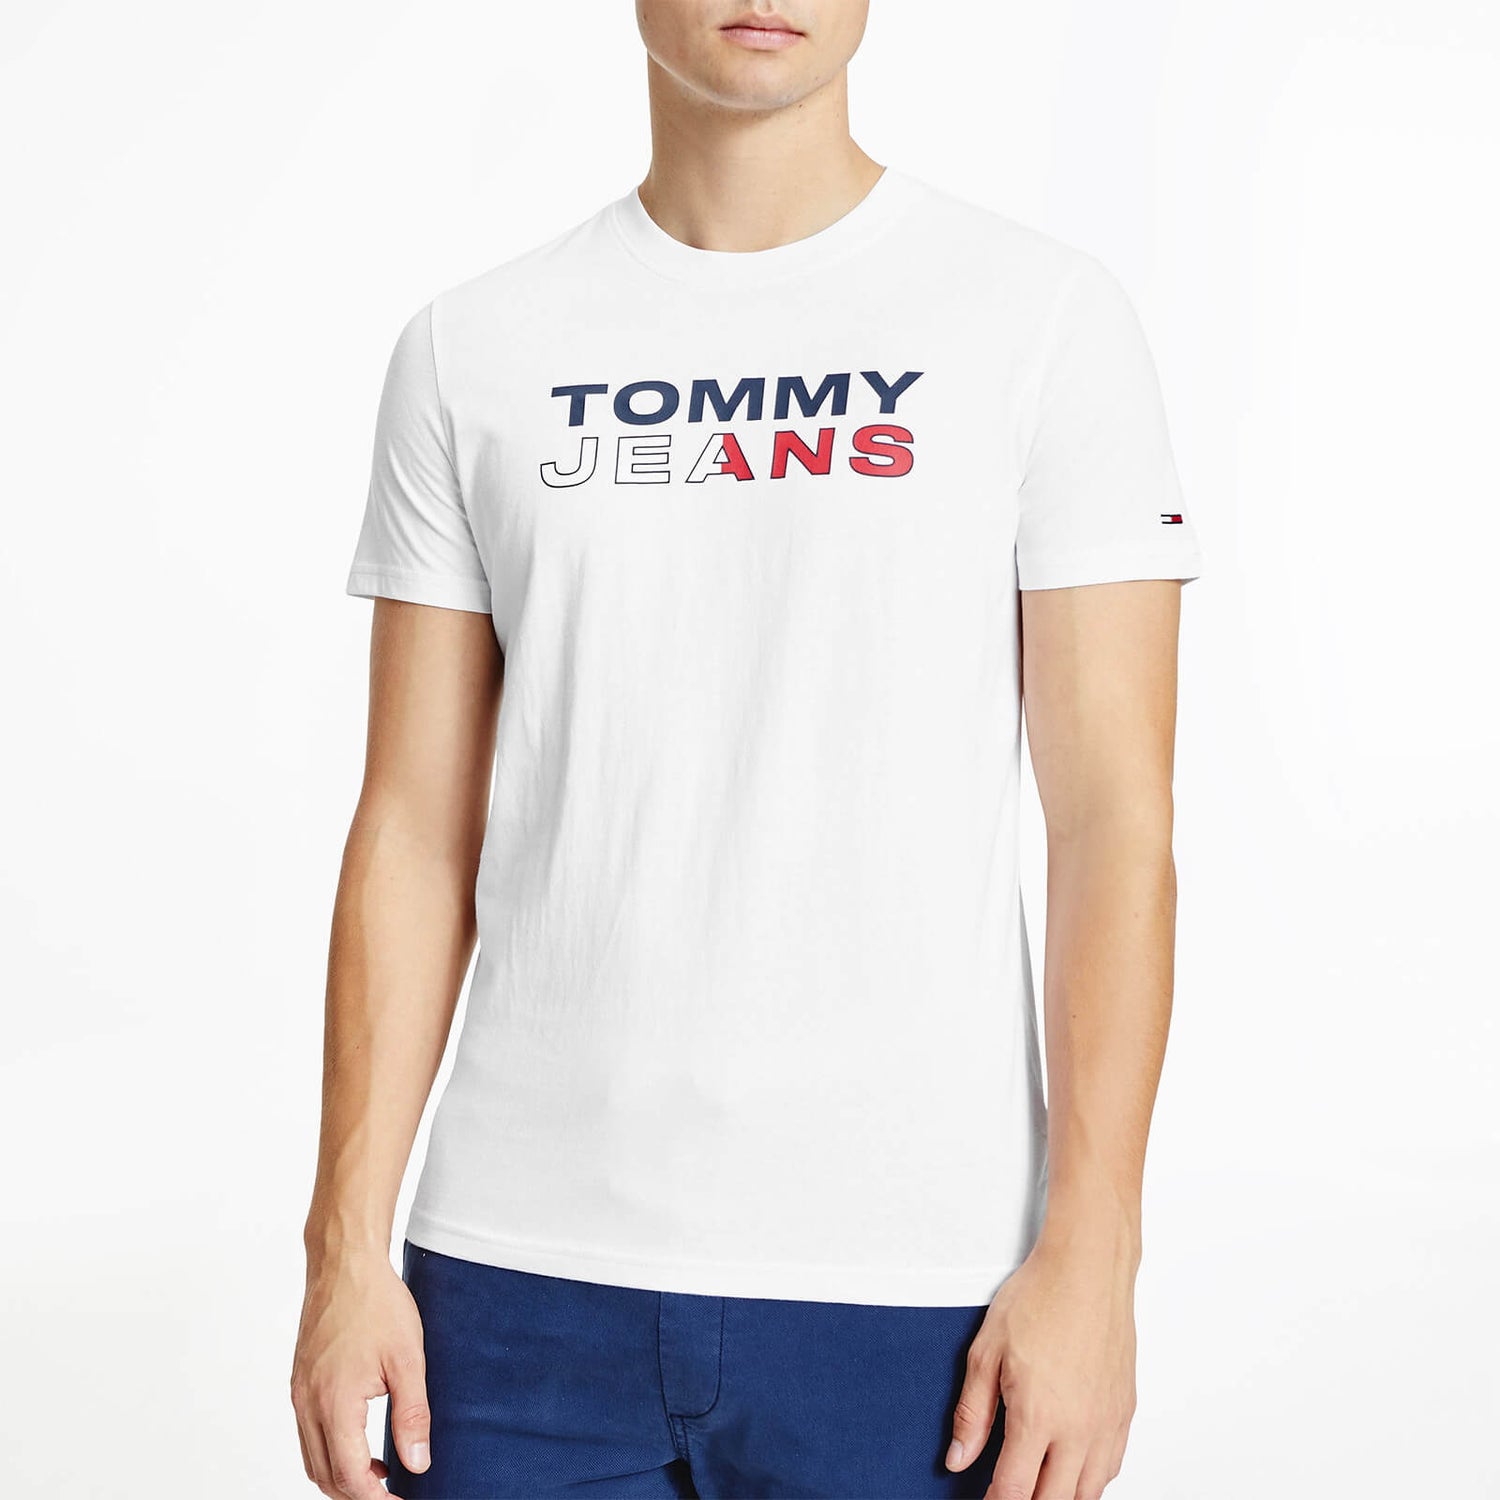 Tommy Jeans Men's Essential Graphic T-Shirt - White - XXL